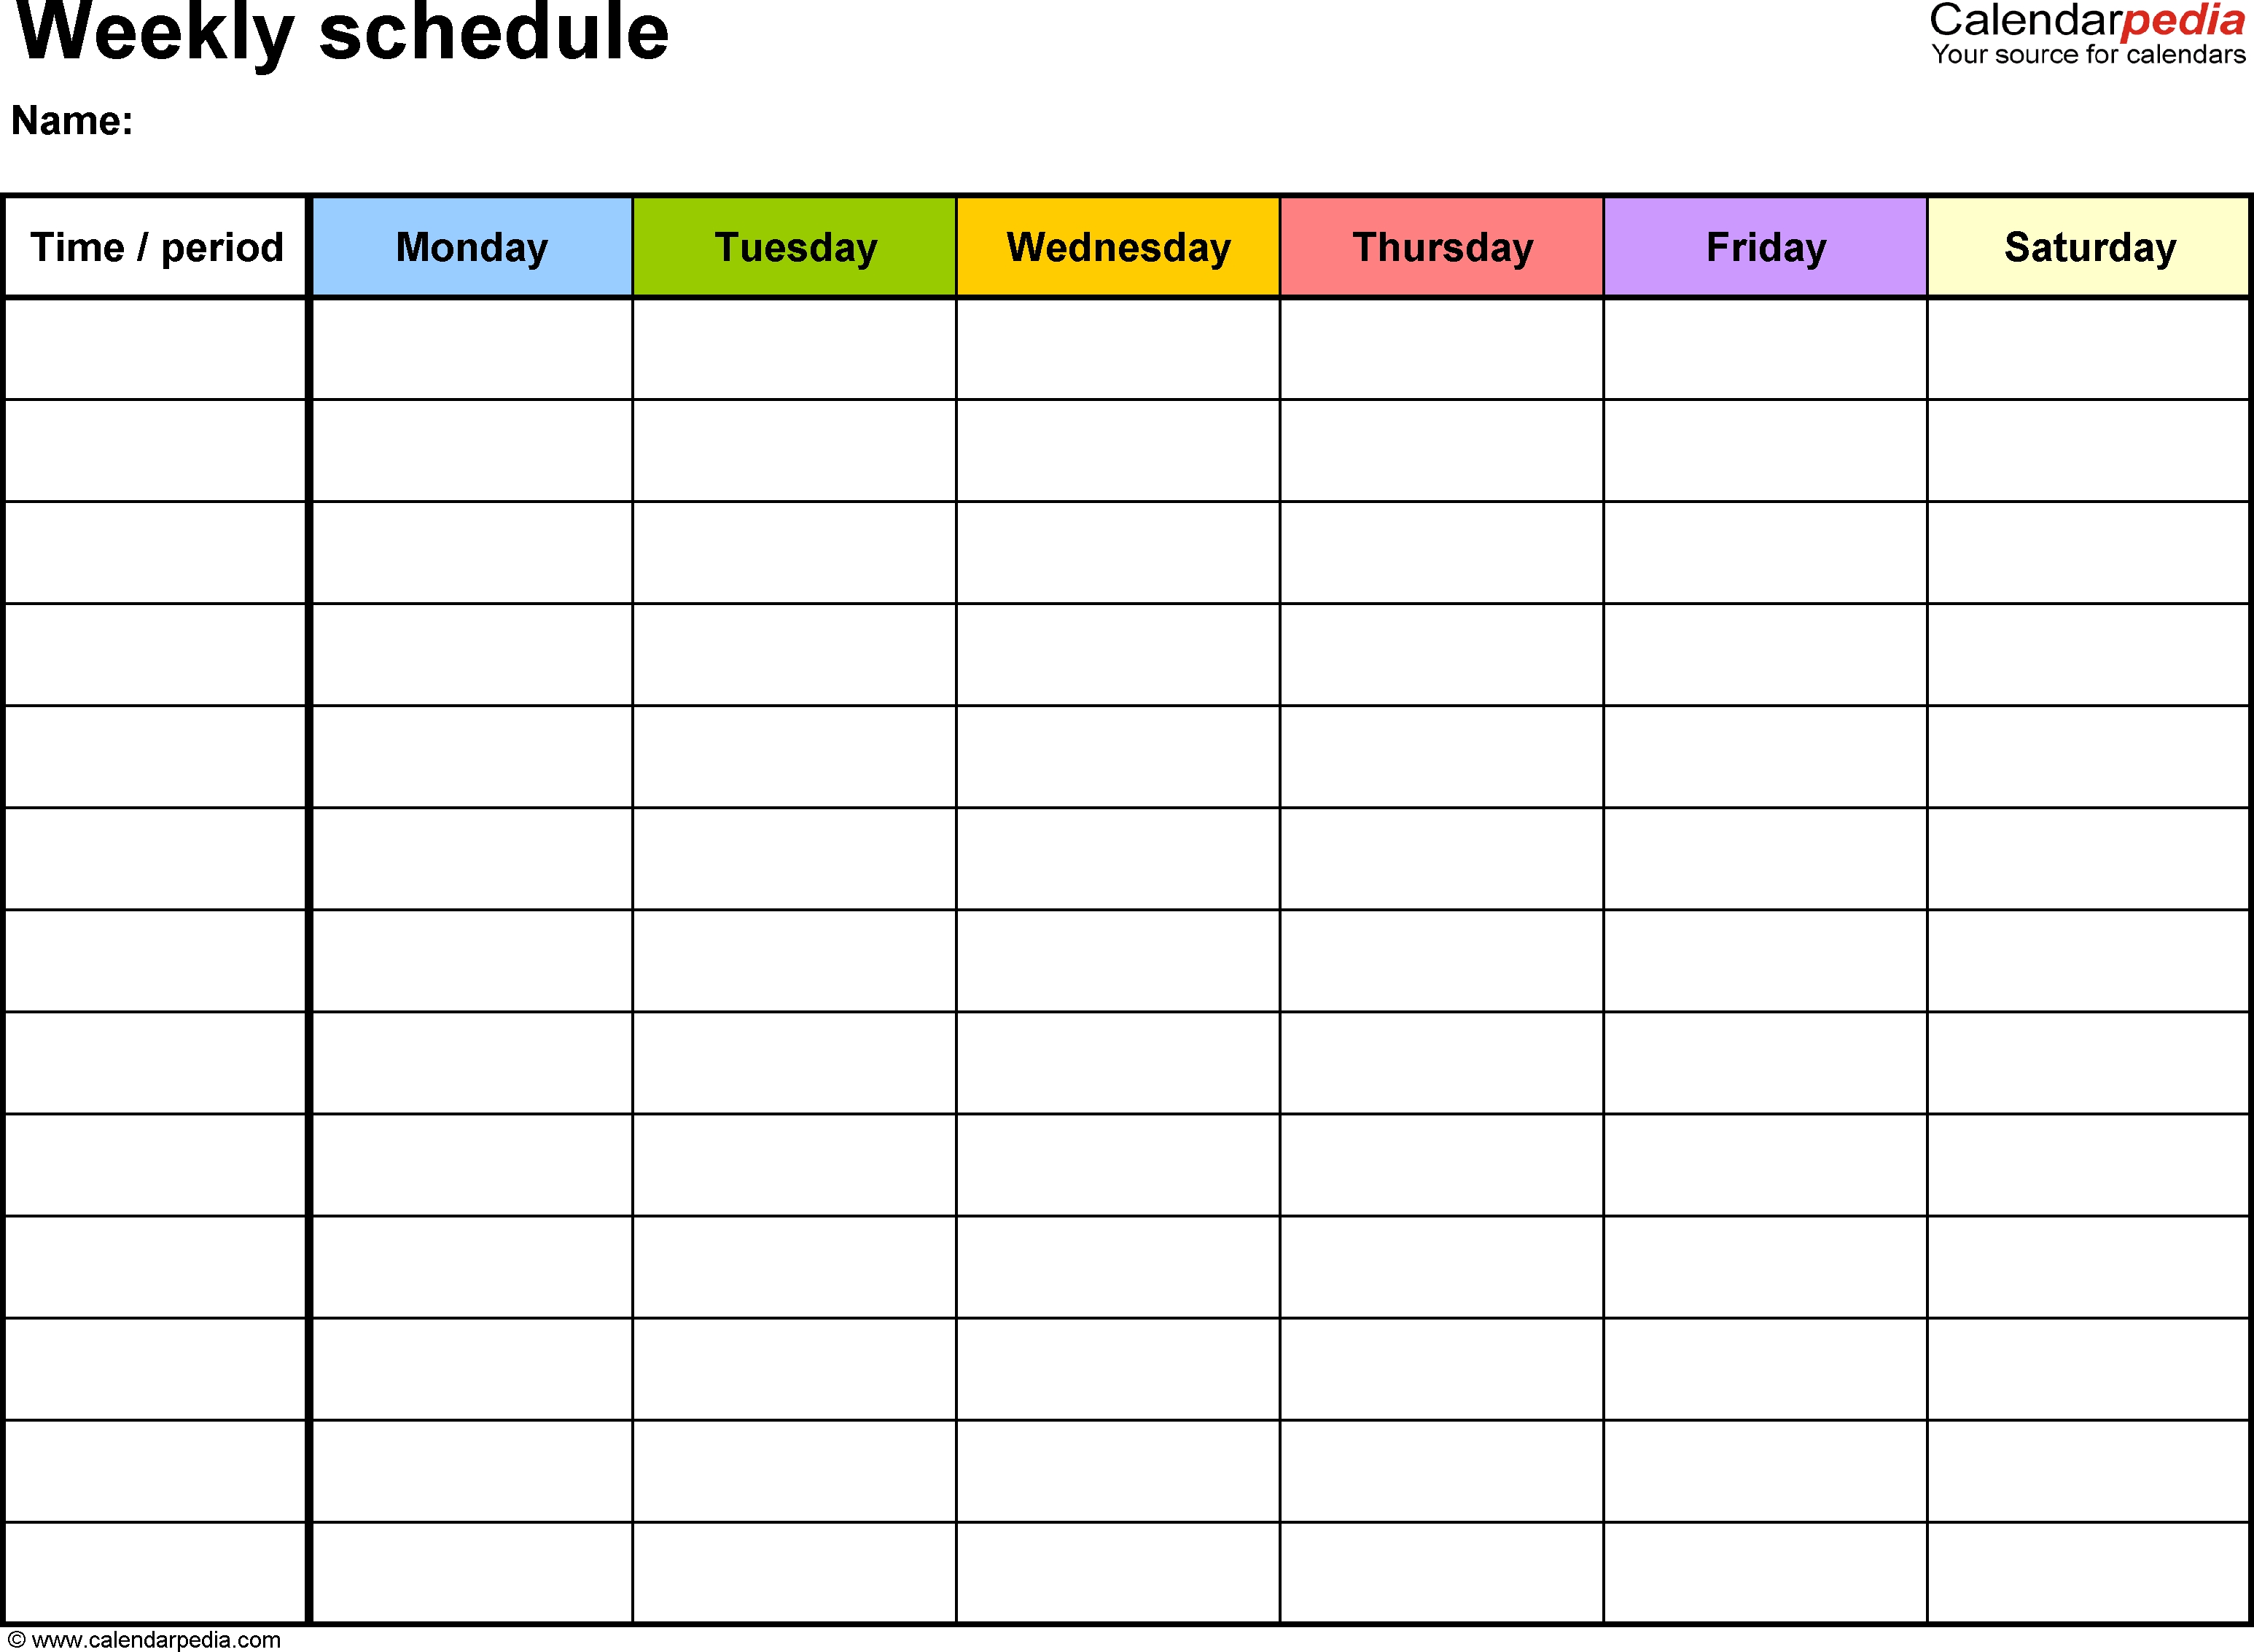 Free Weekly Schedule Templates For Word - 18 Templates in School Calendar Template Monday Thursday